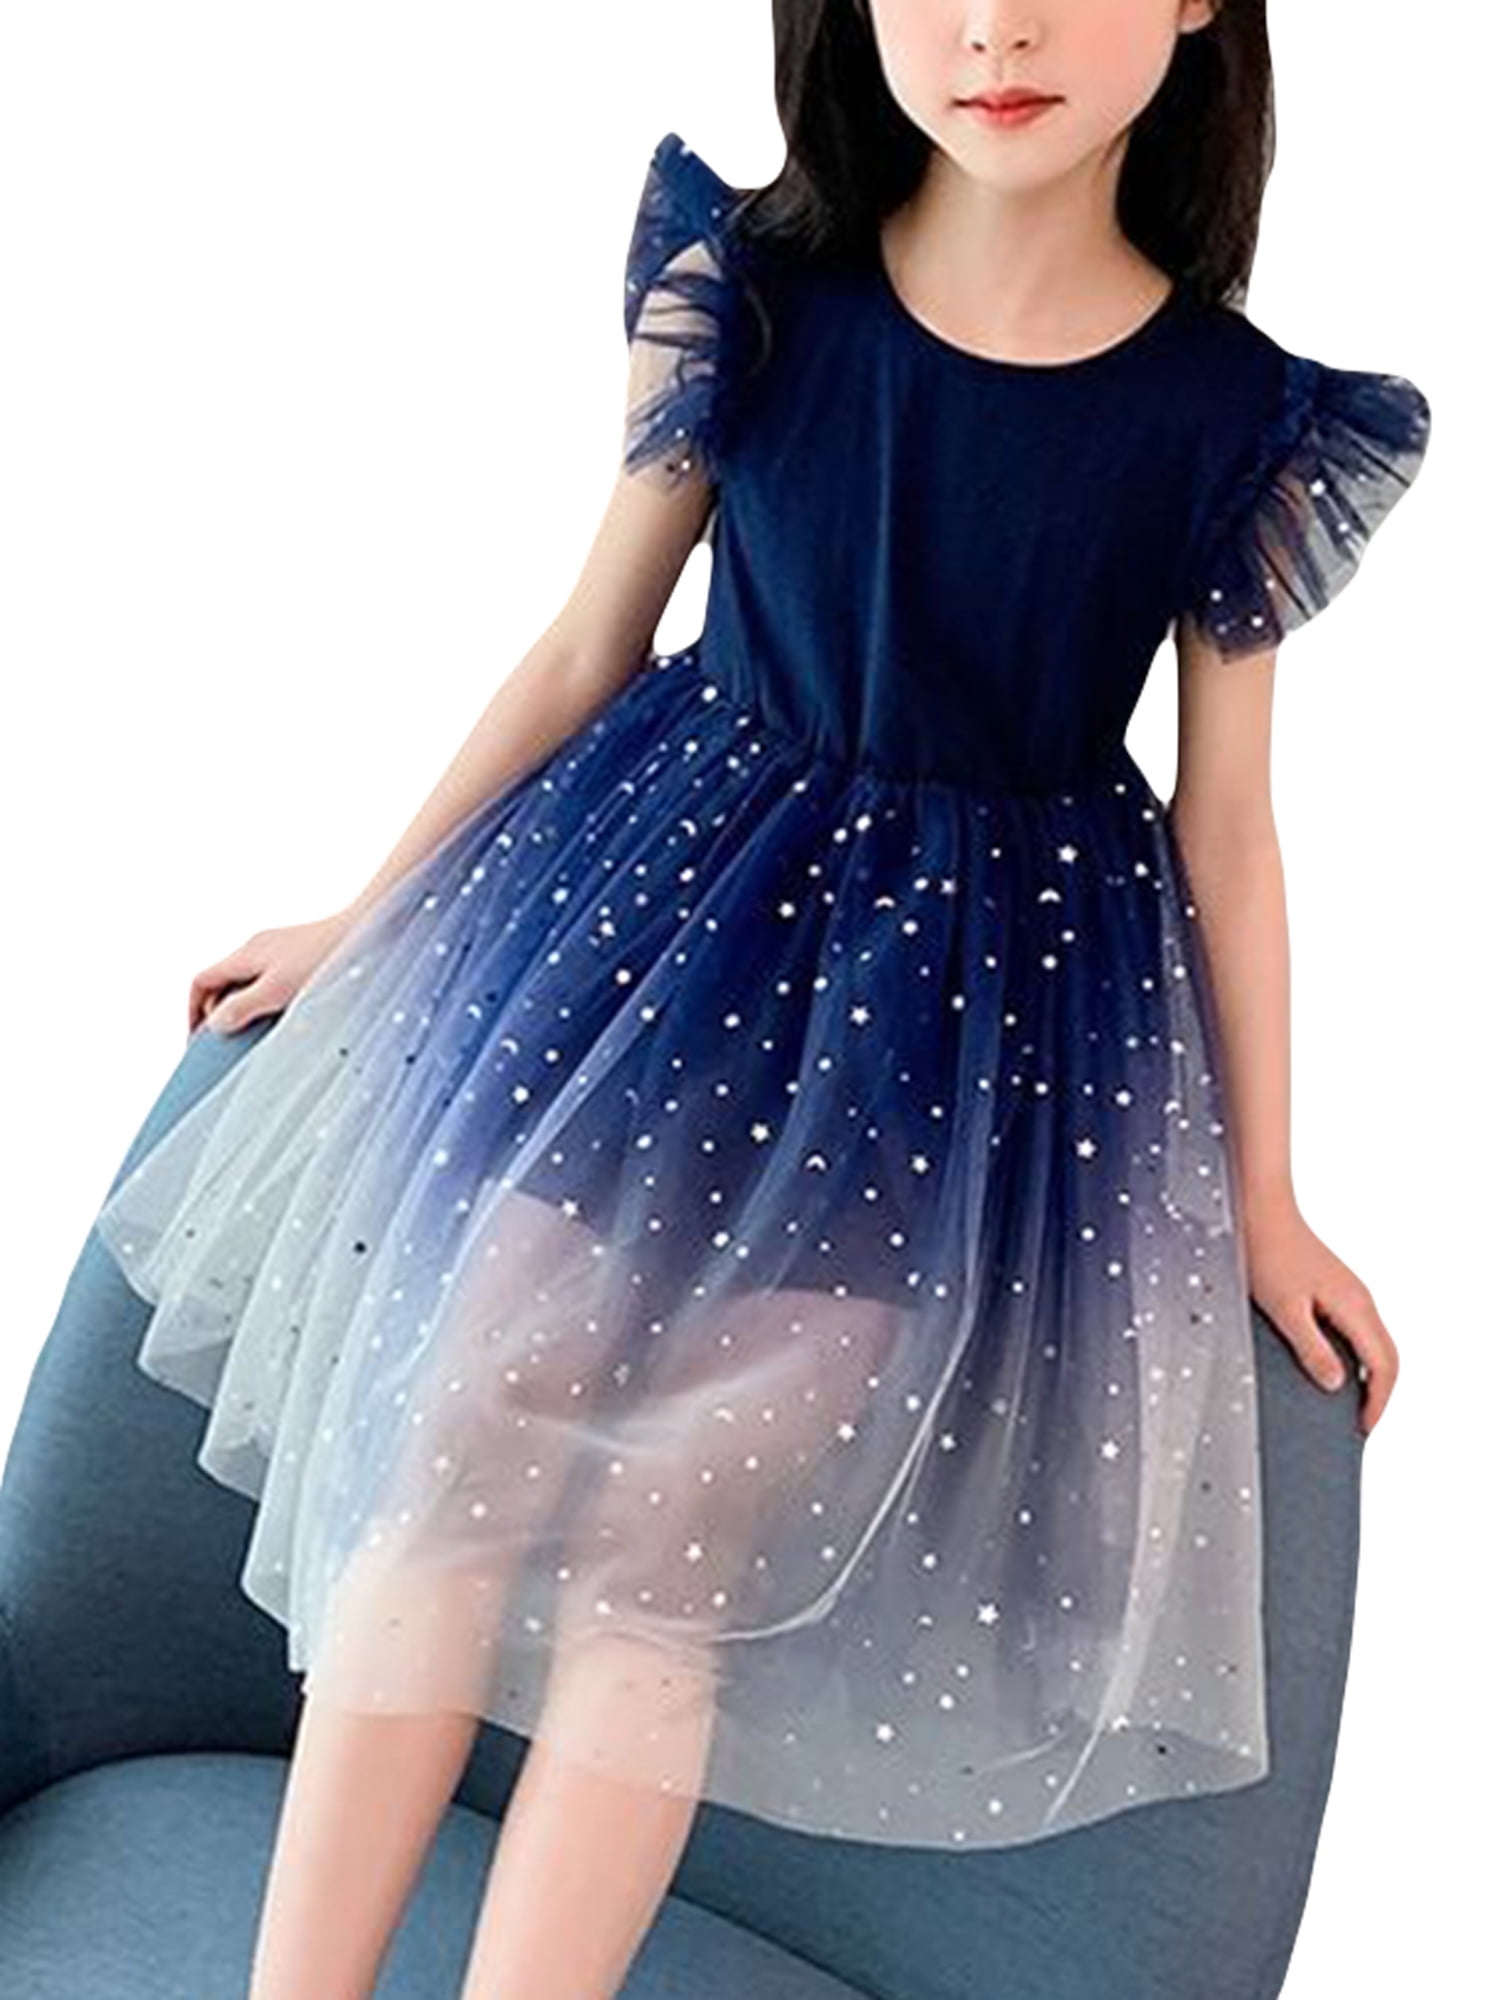 Clothing Girls Clothing Dresses The Moon & Stars Halloween Costume Tutu Party Dress Sparkly Pageant Gala Ball Gown Black and Blue Tutu A Unique Gift. 